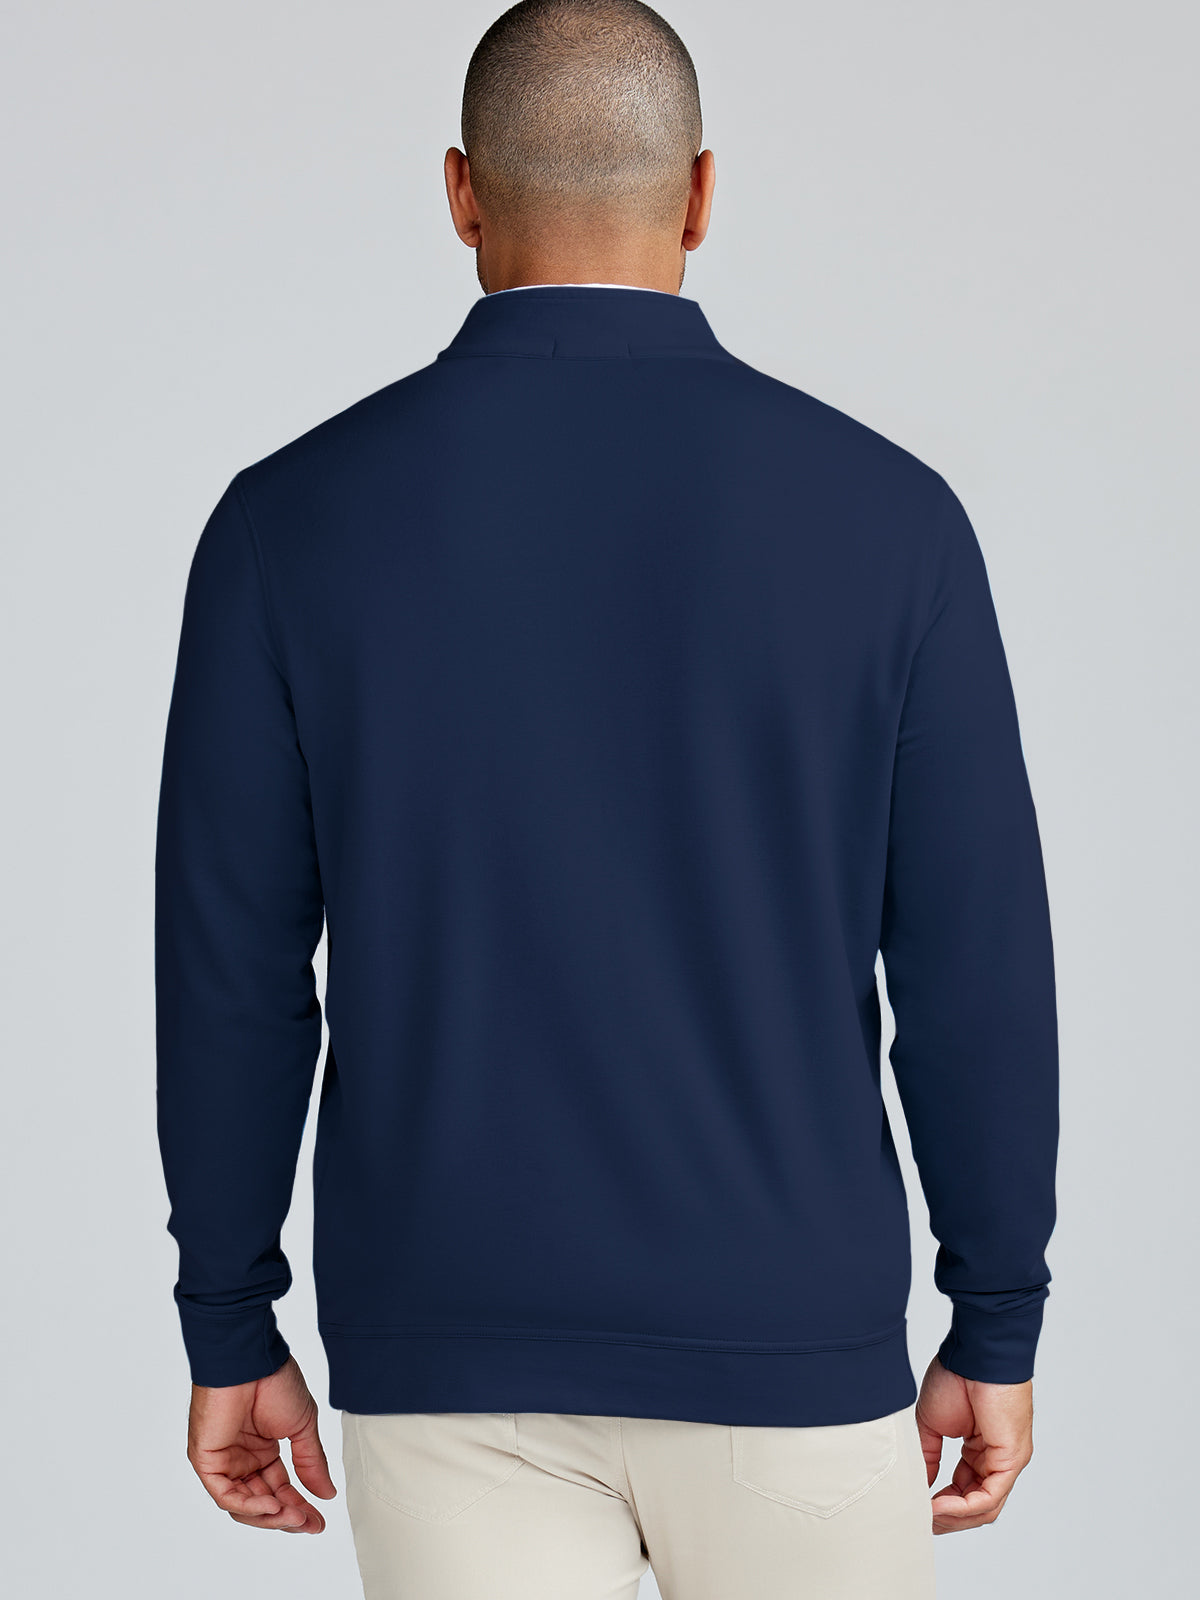 Cloud French Terry Quarter Zip - Columbia - tasc Performance (ClassicNavy)